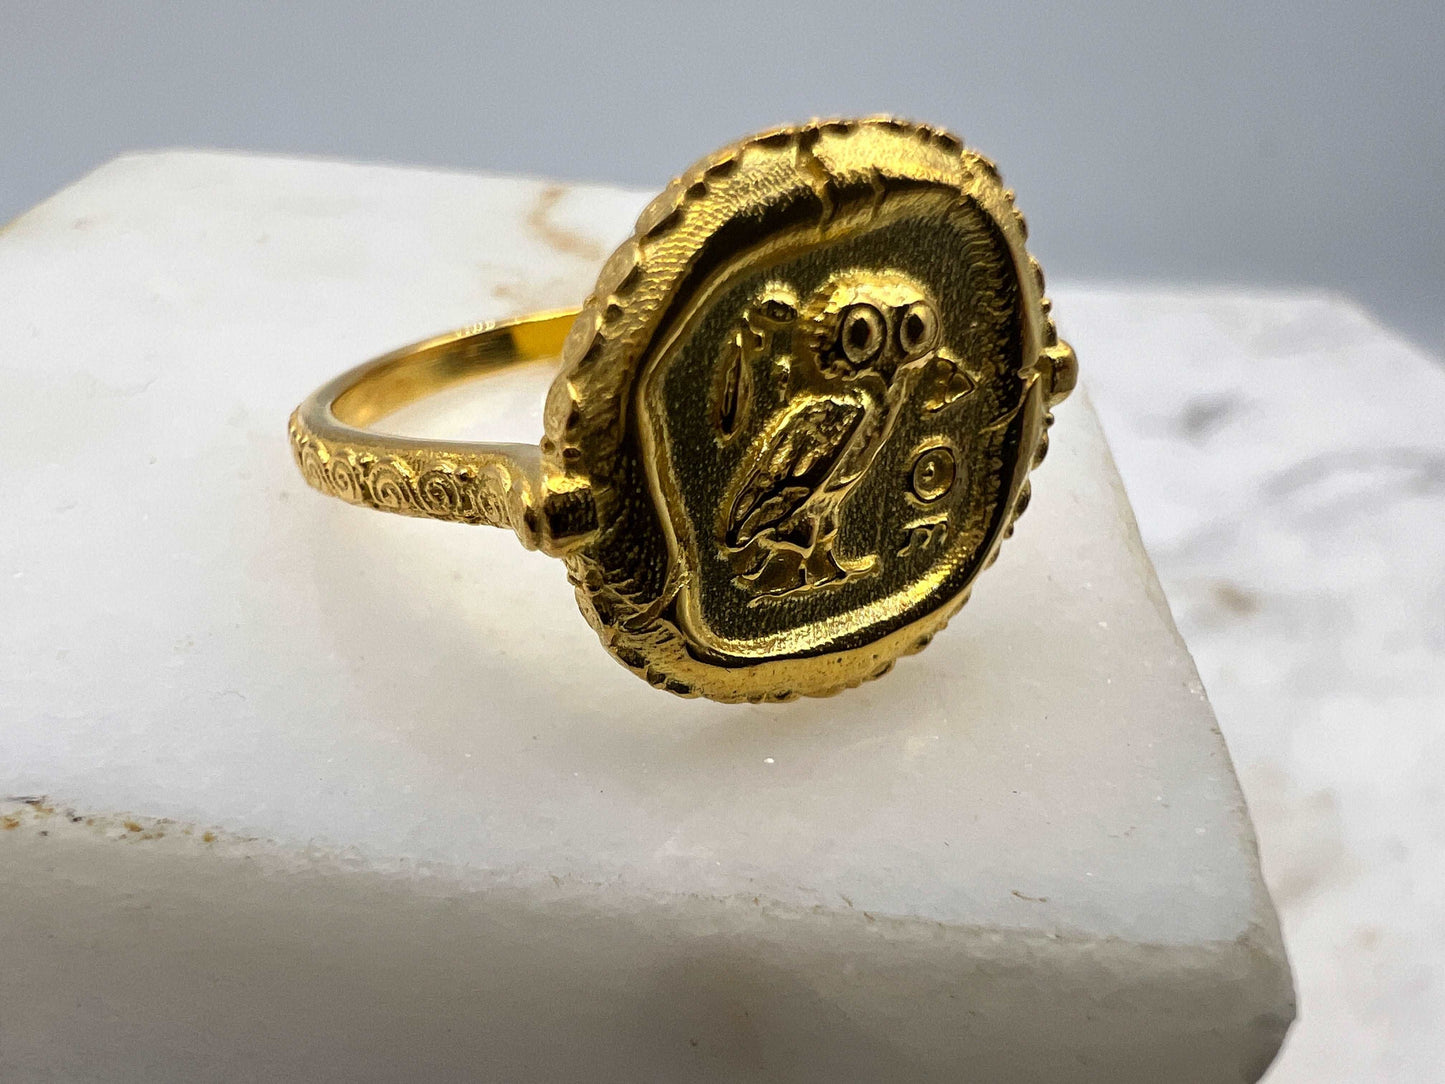 Athena owl Signet ring ancient Greek coin copy solid gold